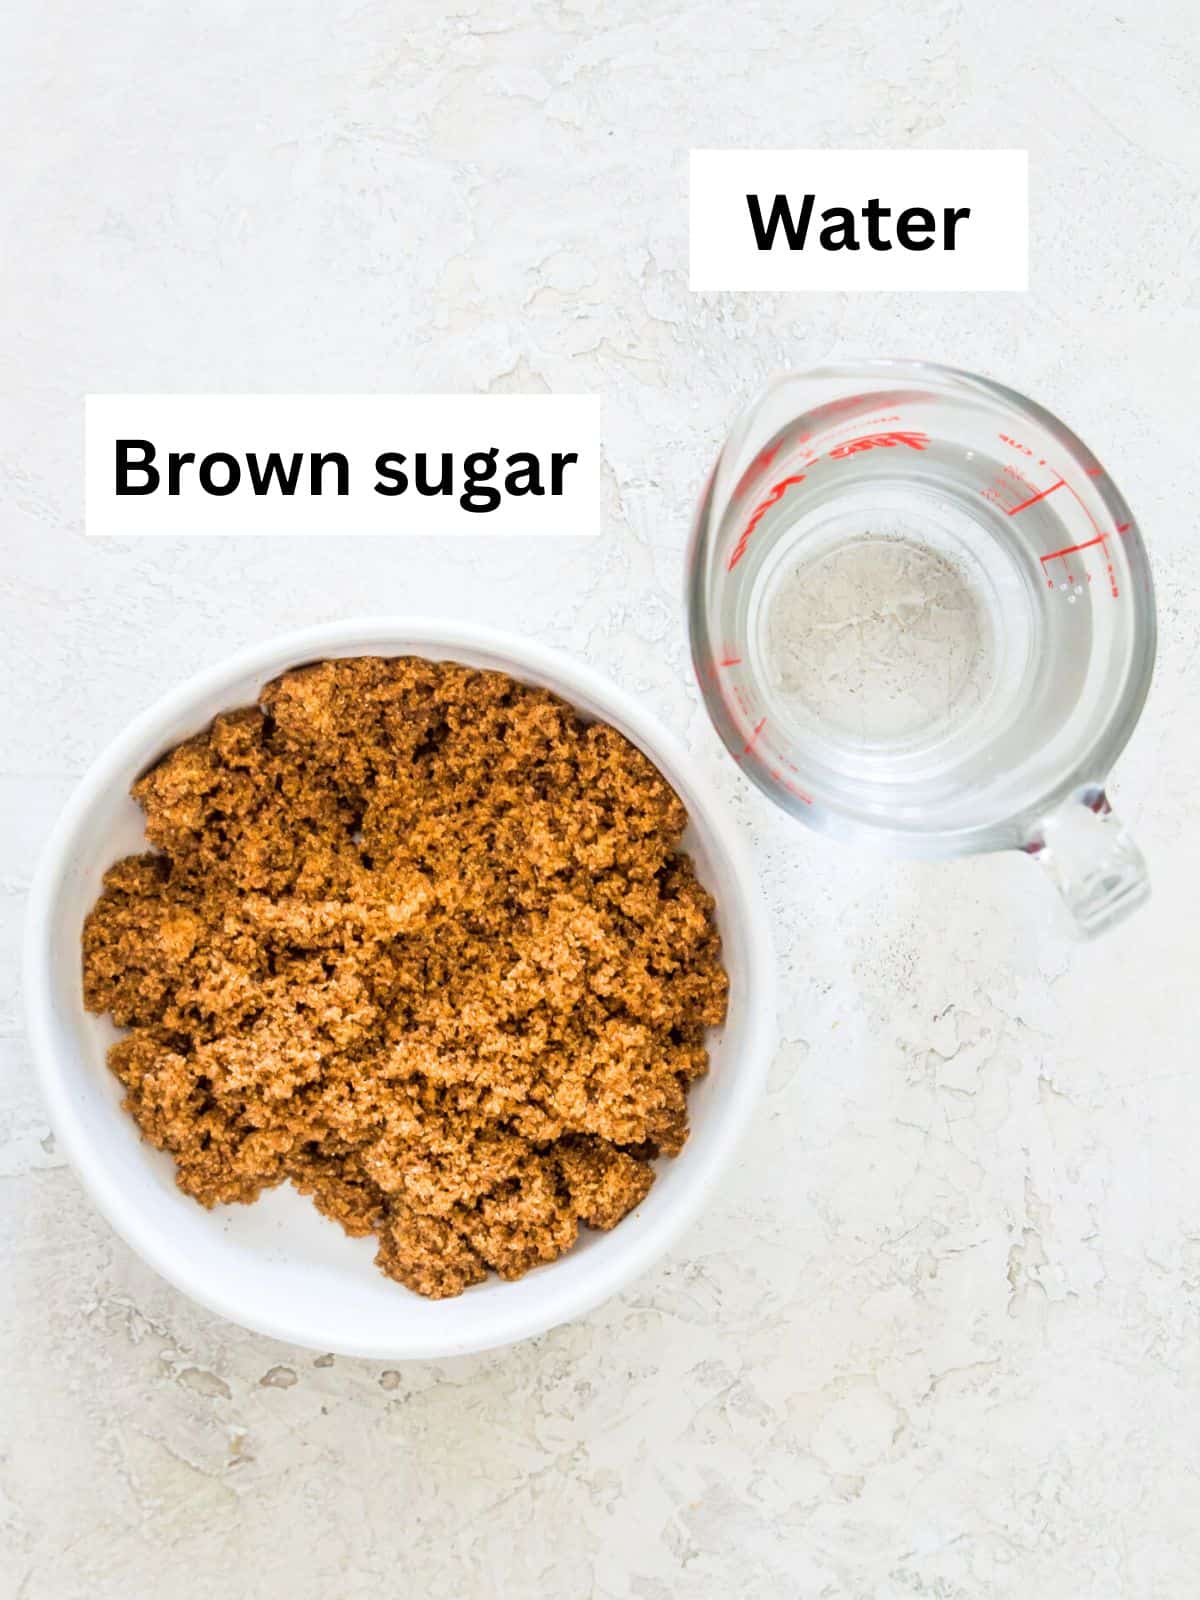 A white bowl filled with brown sugar and a glass measuring cup filled with water.